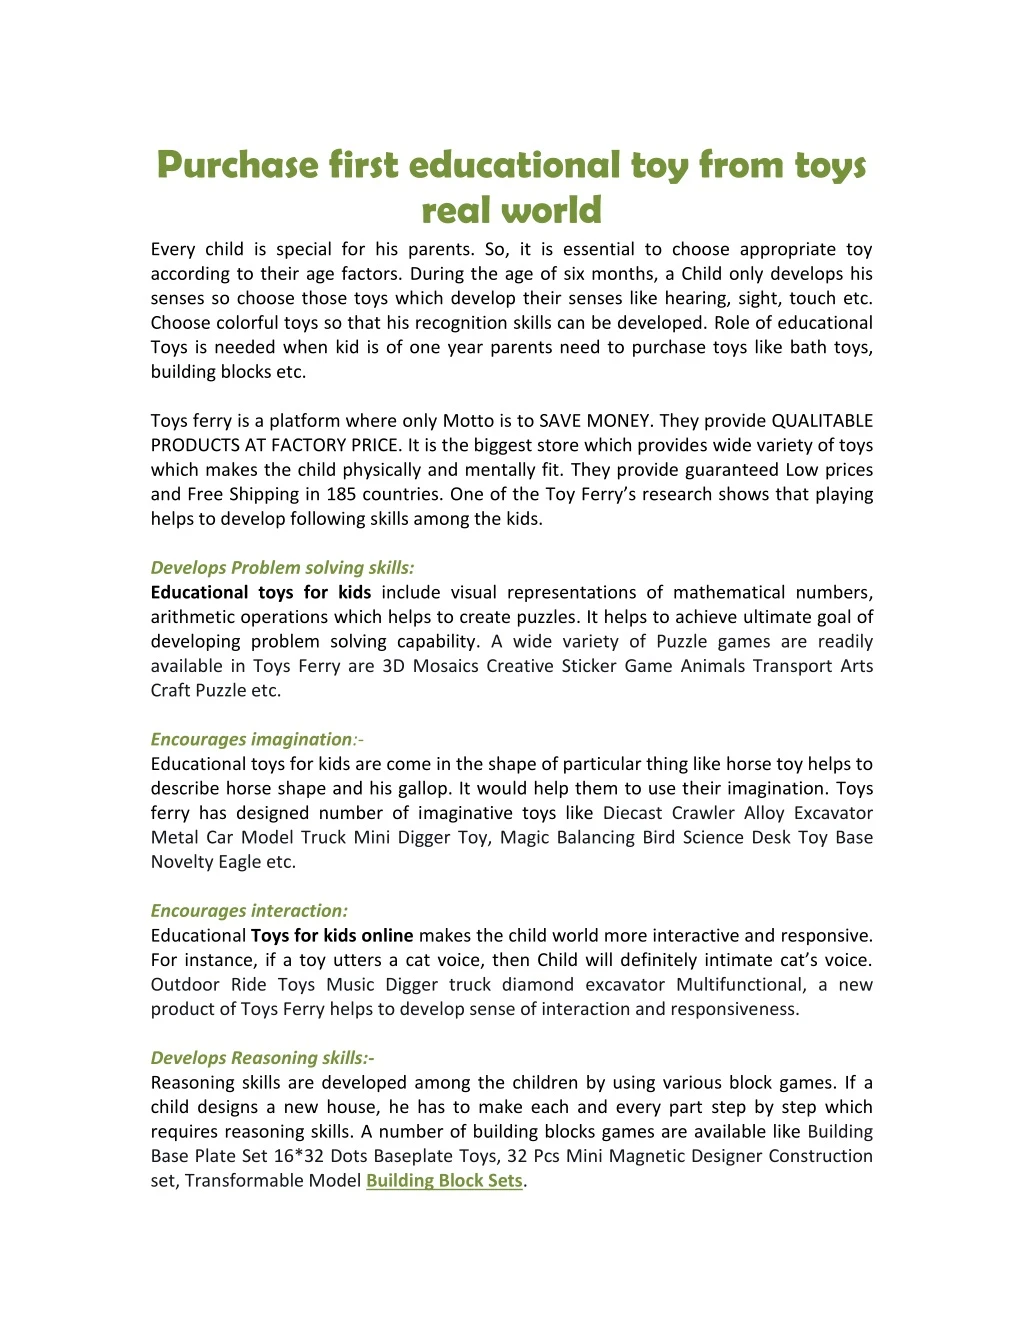 purchase first educational toy from toys real